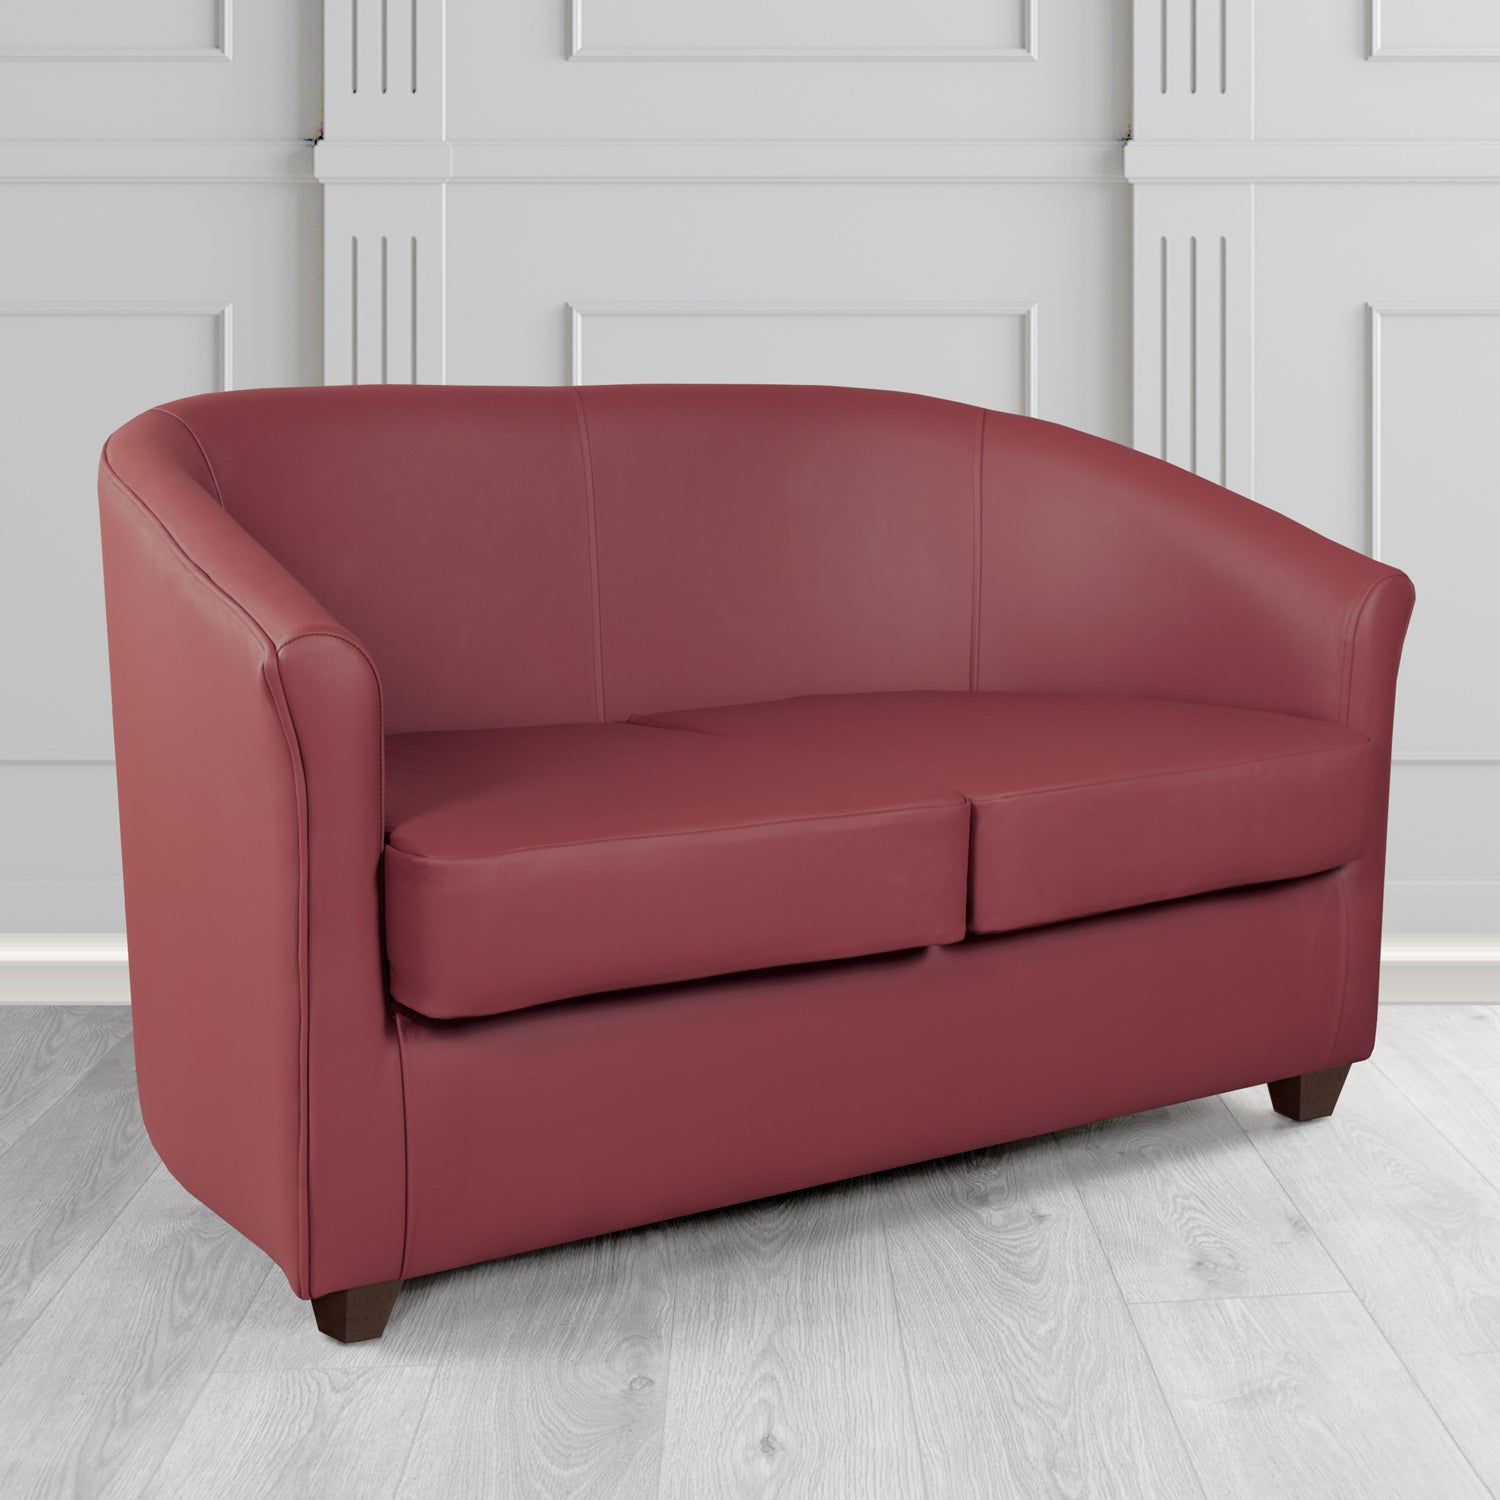 Cannes 2 Seater Tub Sofa in Just Colour Mulled Wine Crib 5 Faux Leather - The Tub Chair Shop